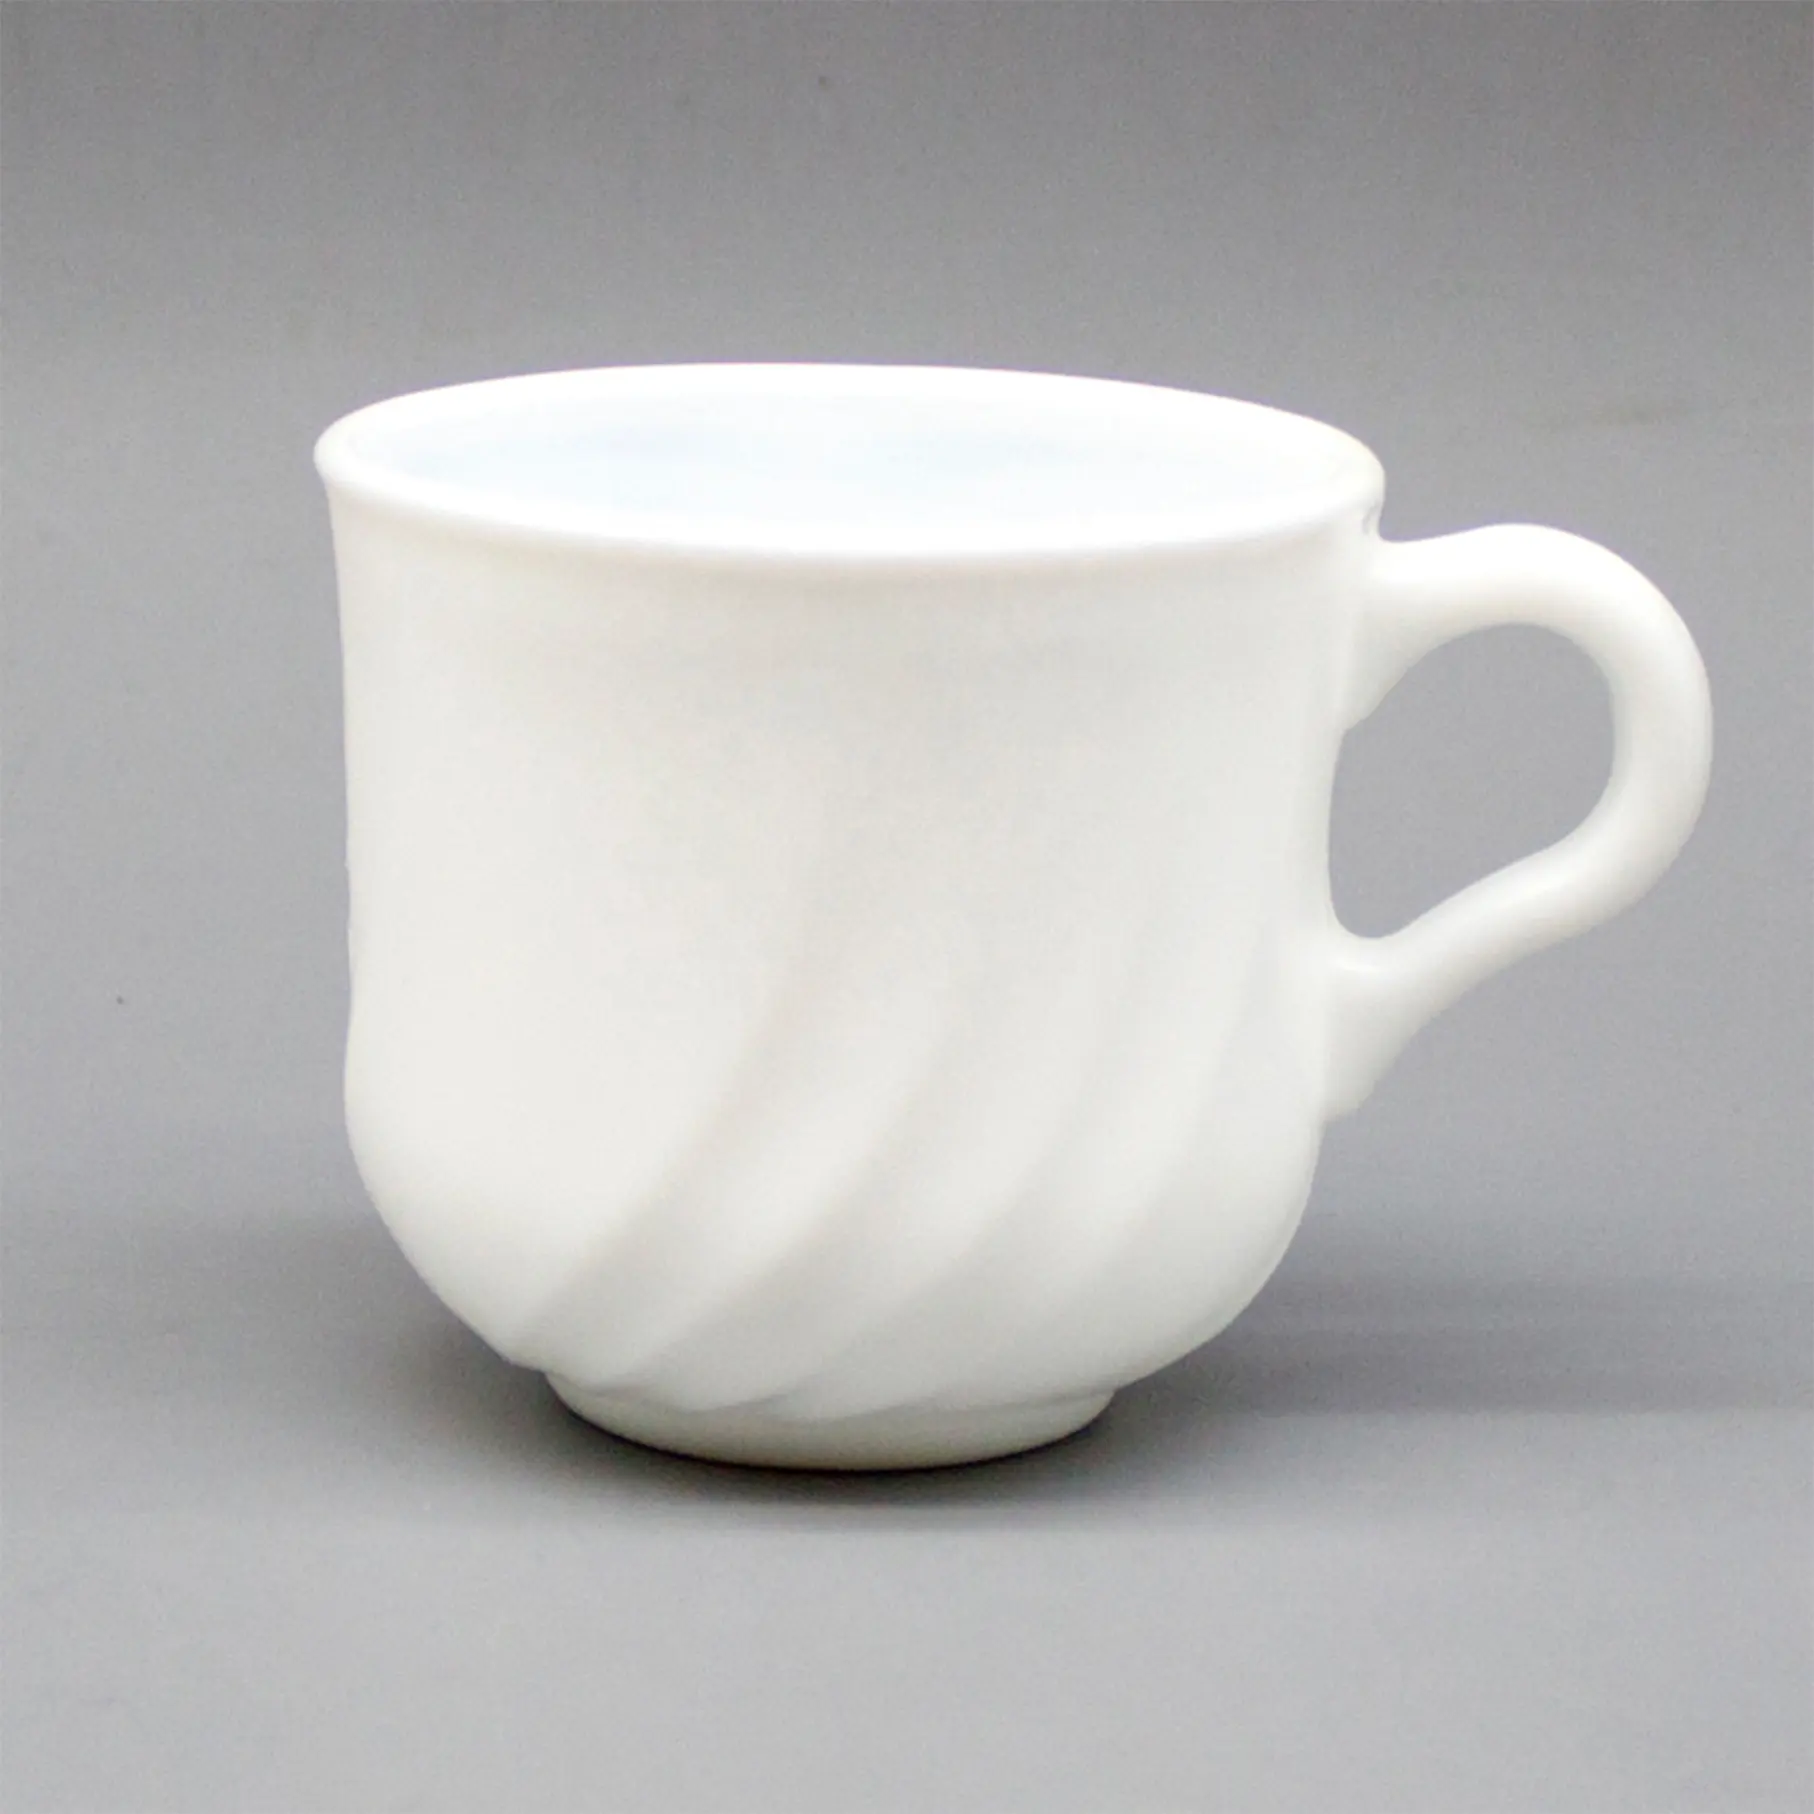 white opal glass cup water drinking cup with handle white color glass mug solid color opal glass cup with handle for coffee tea